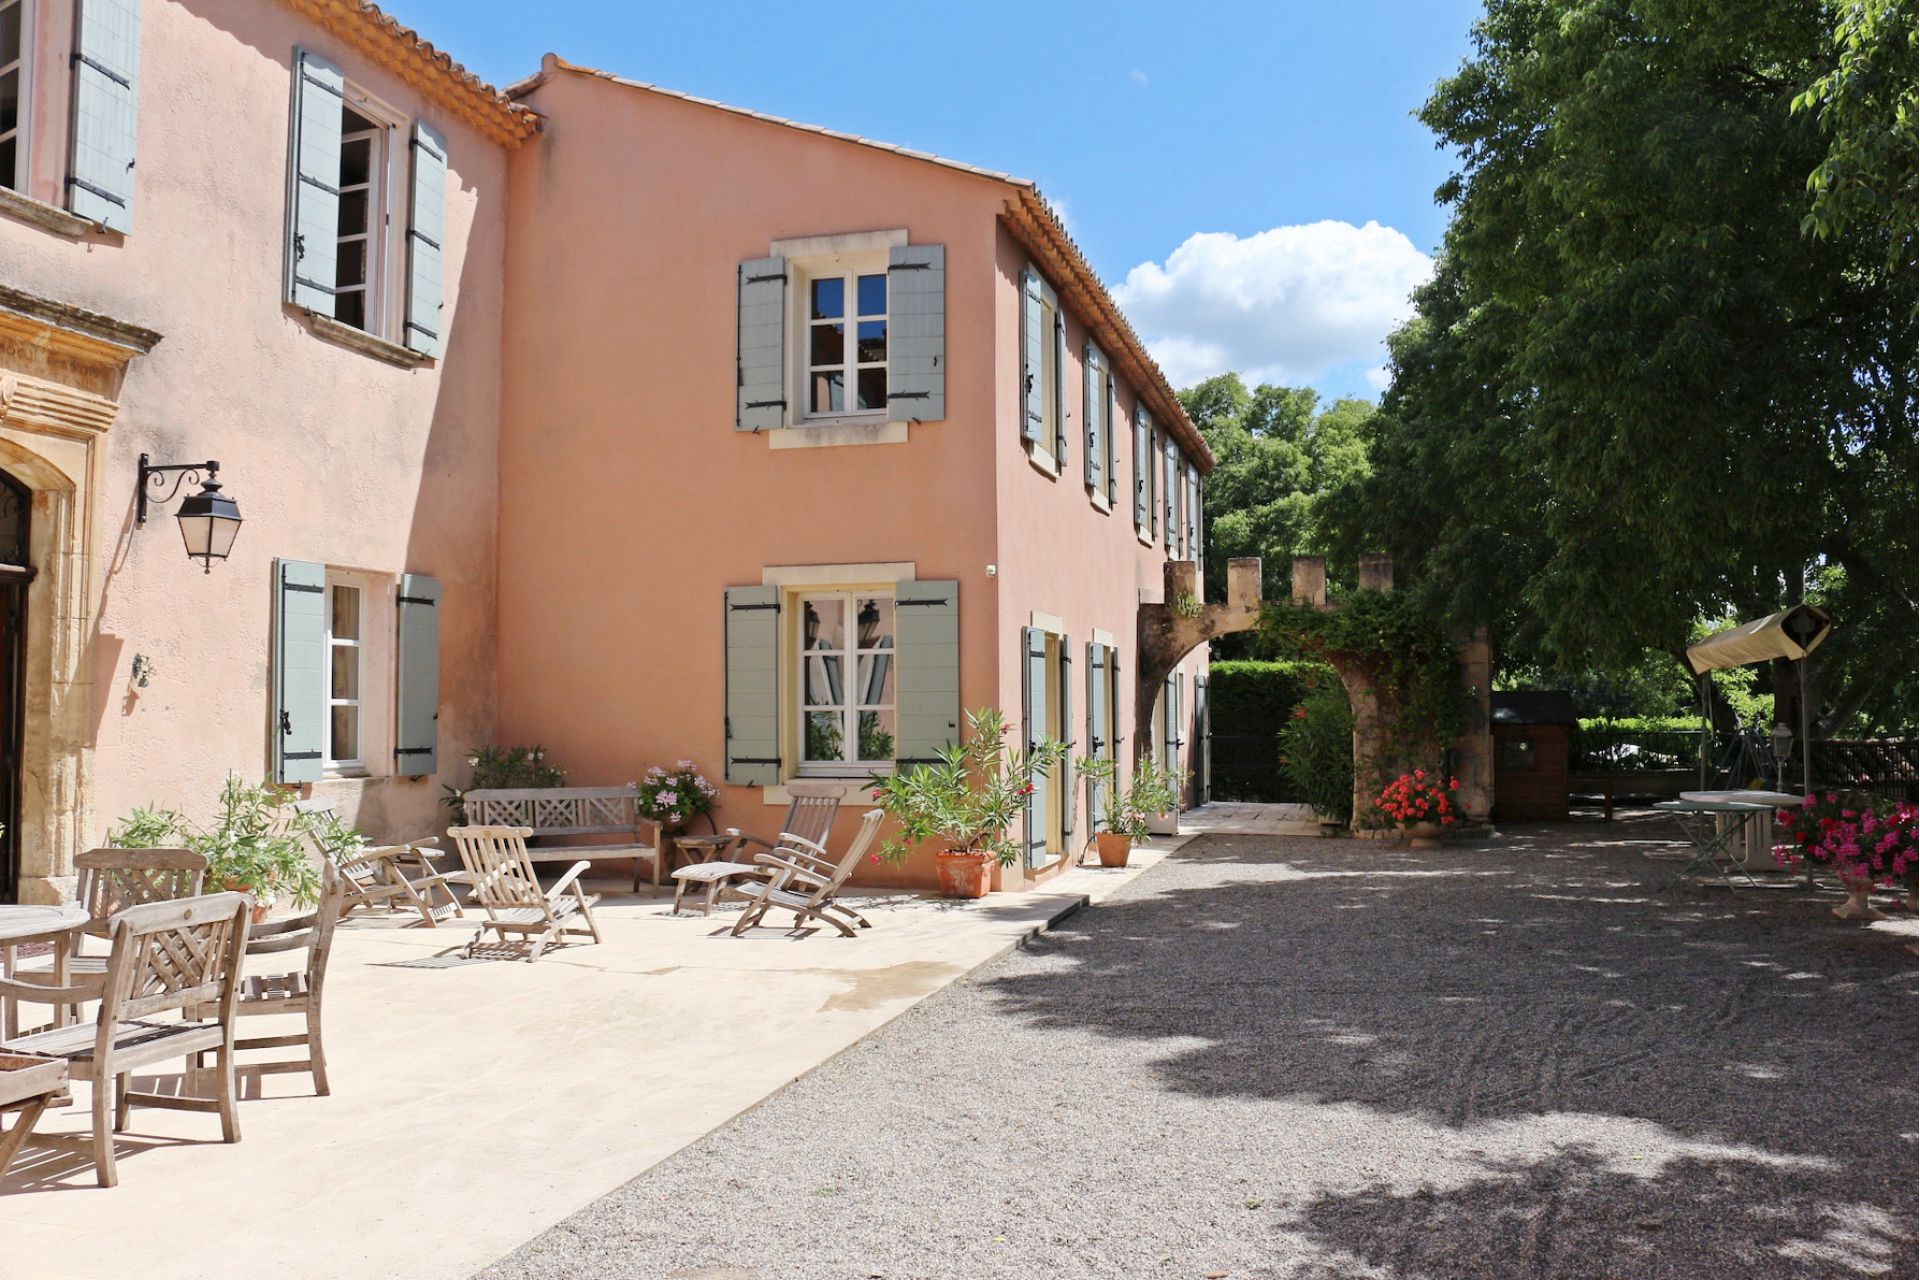 Méditerranée Location Manor with Private pool in Raphèle les Arles, Provence